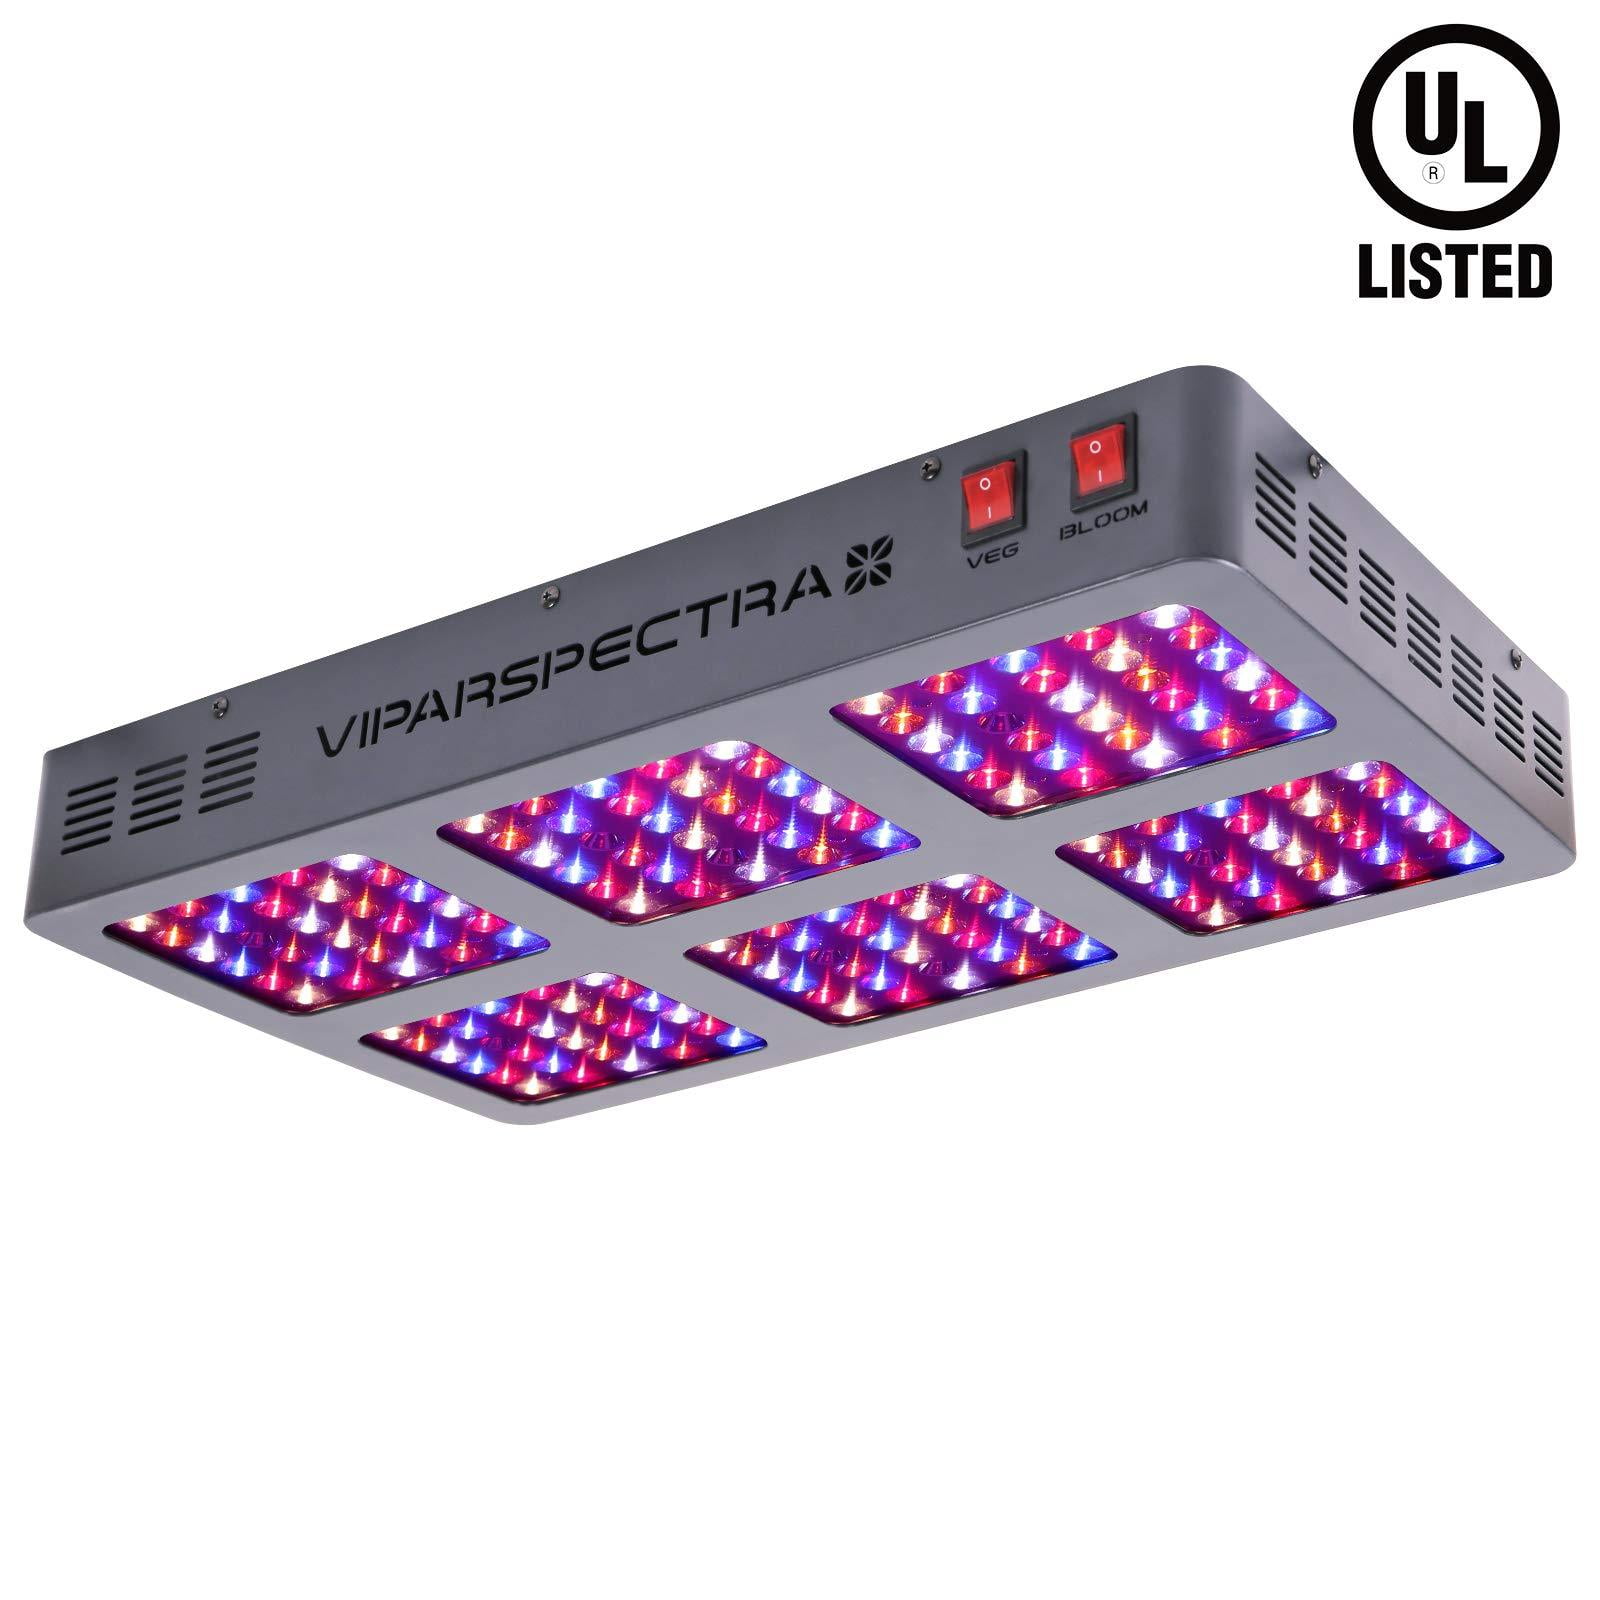 Full Spectrum Double Switch Plant Light for Indoor Plants Veg and Flower VIPARSPECTRA 900W LED Grow Light